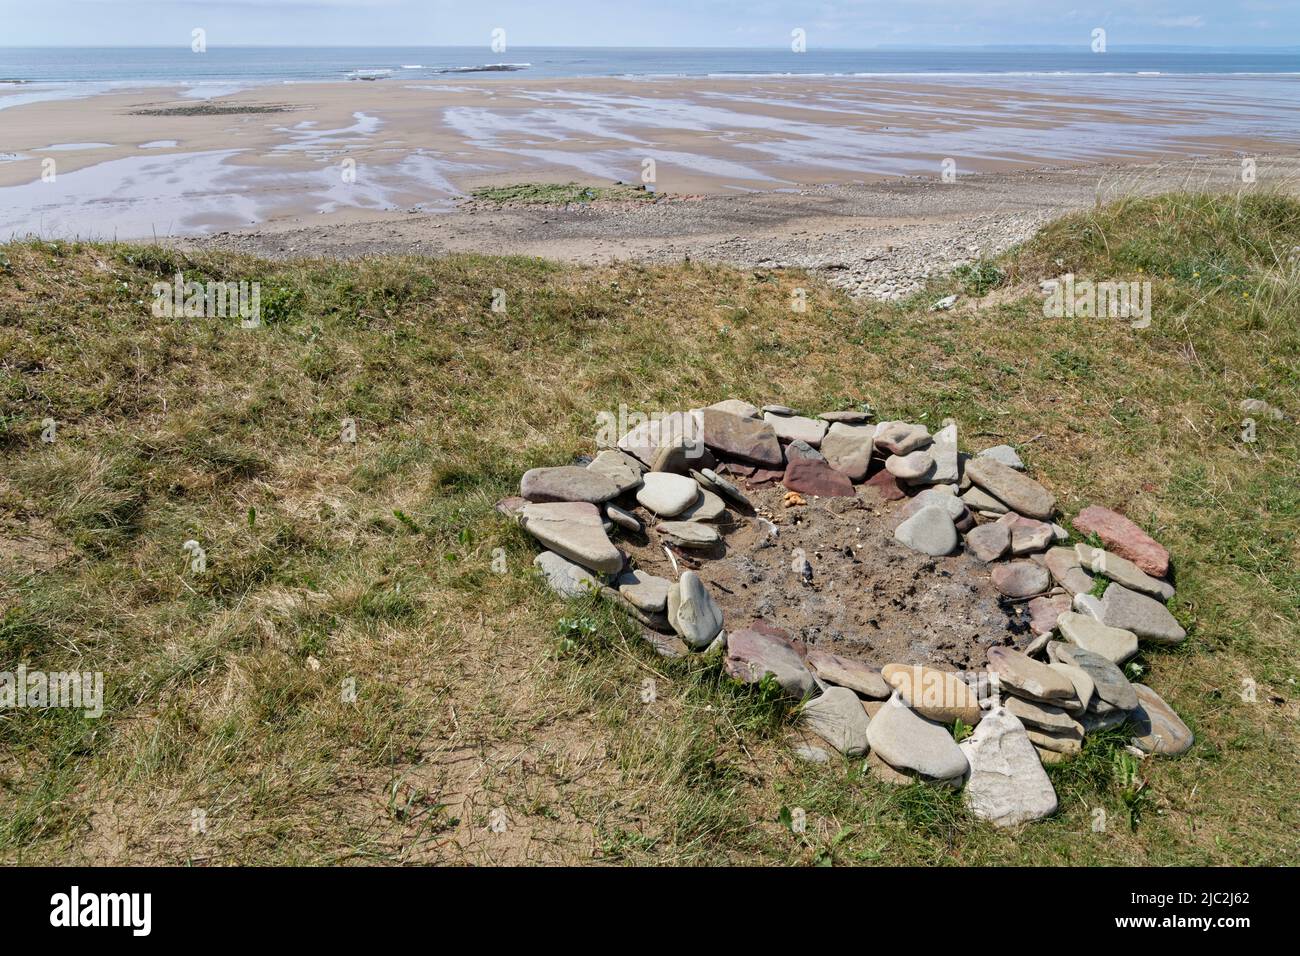 Remains of a camp fire on coastal sand dunes on the sea front, likely to cause damage to vegetation and worsen coastal erosion, Kenfig NNR, Wales. Stock Photo